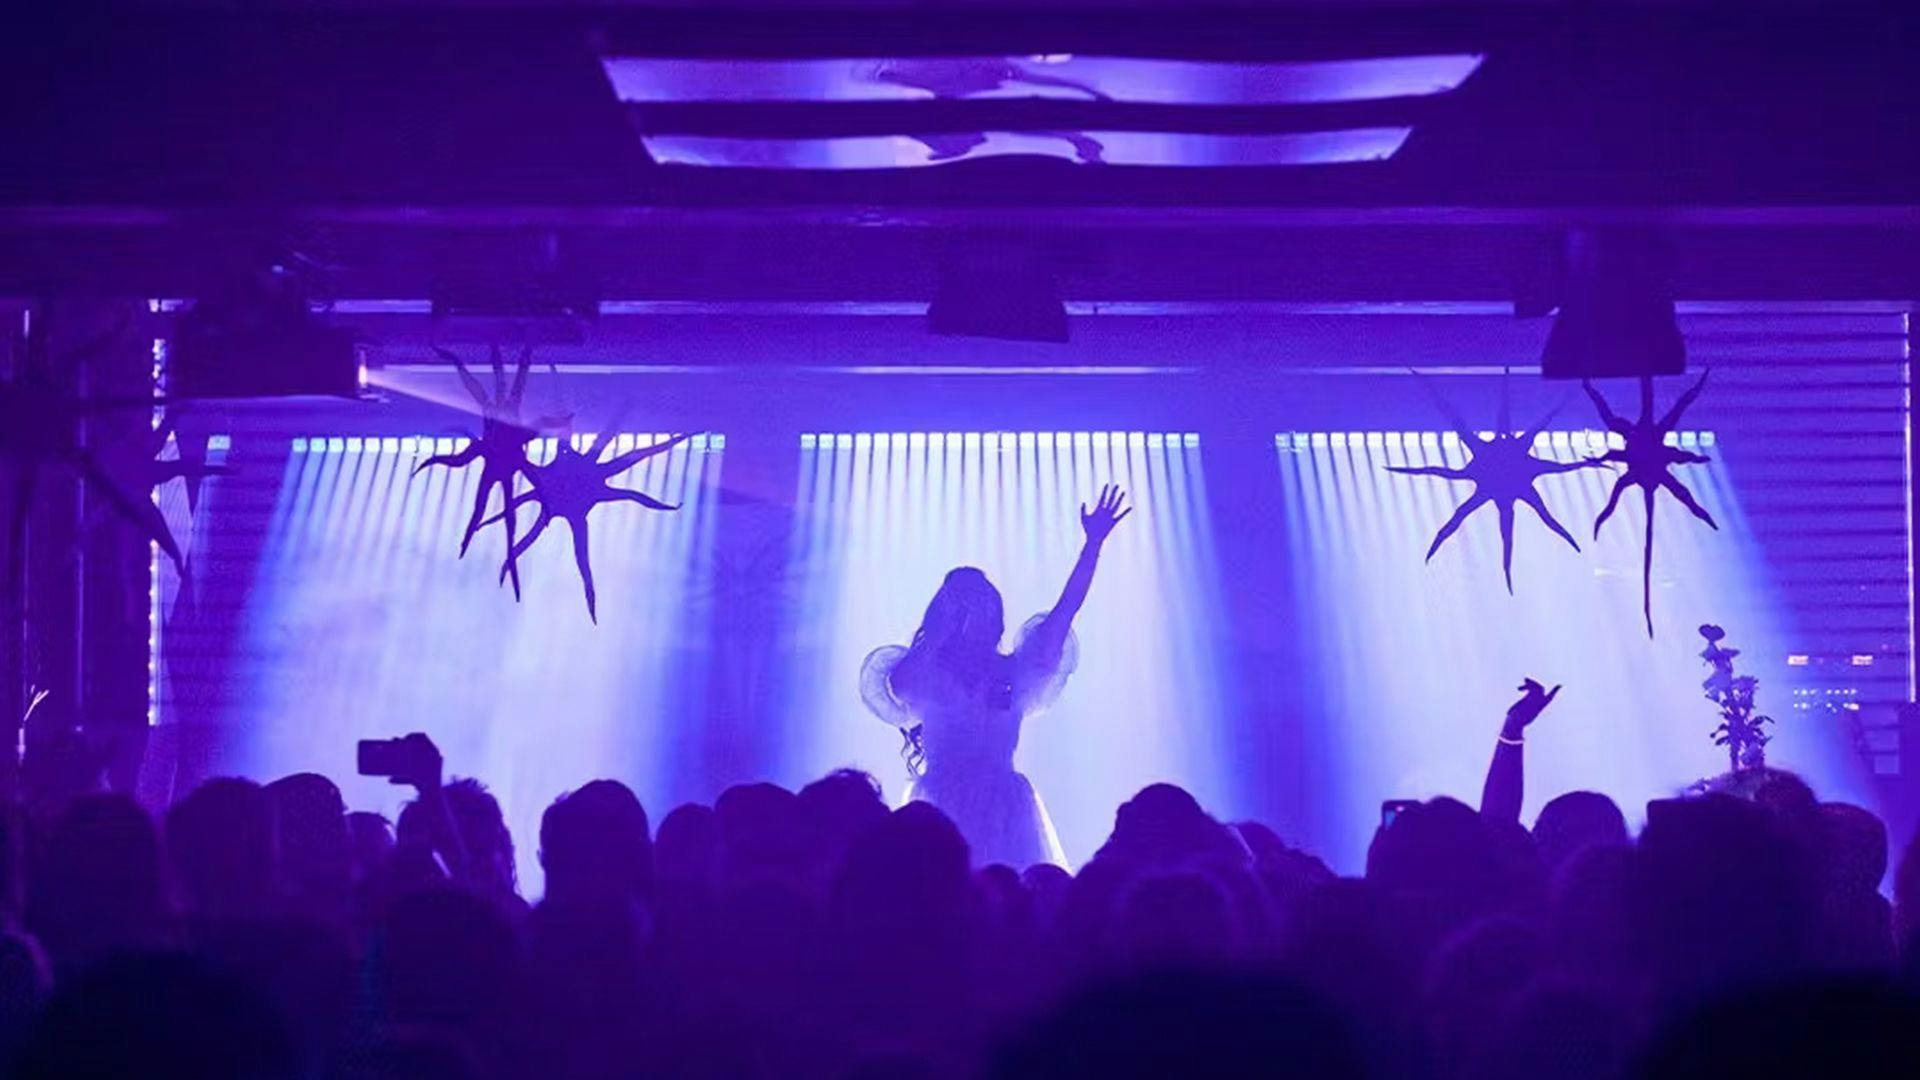 A woman on a purple lit stage reaches her hand out while singing to a crowd of silhouettes